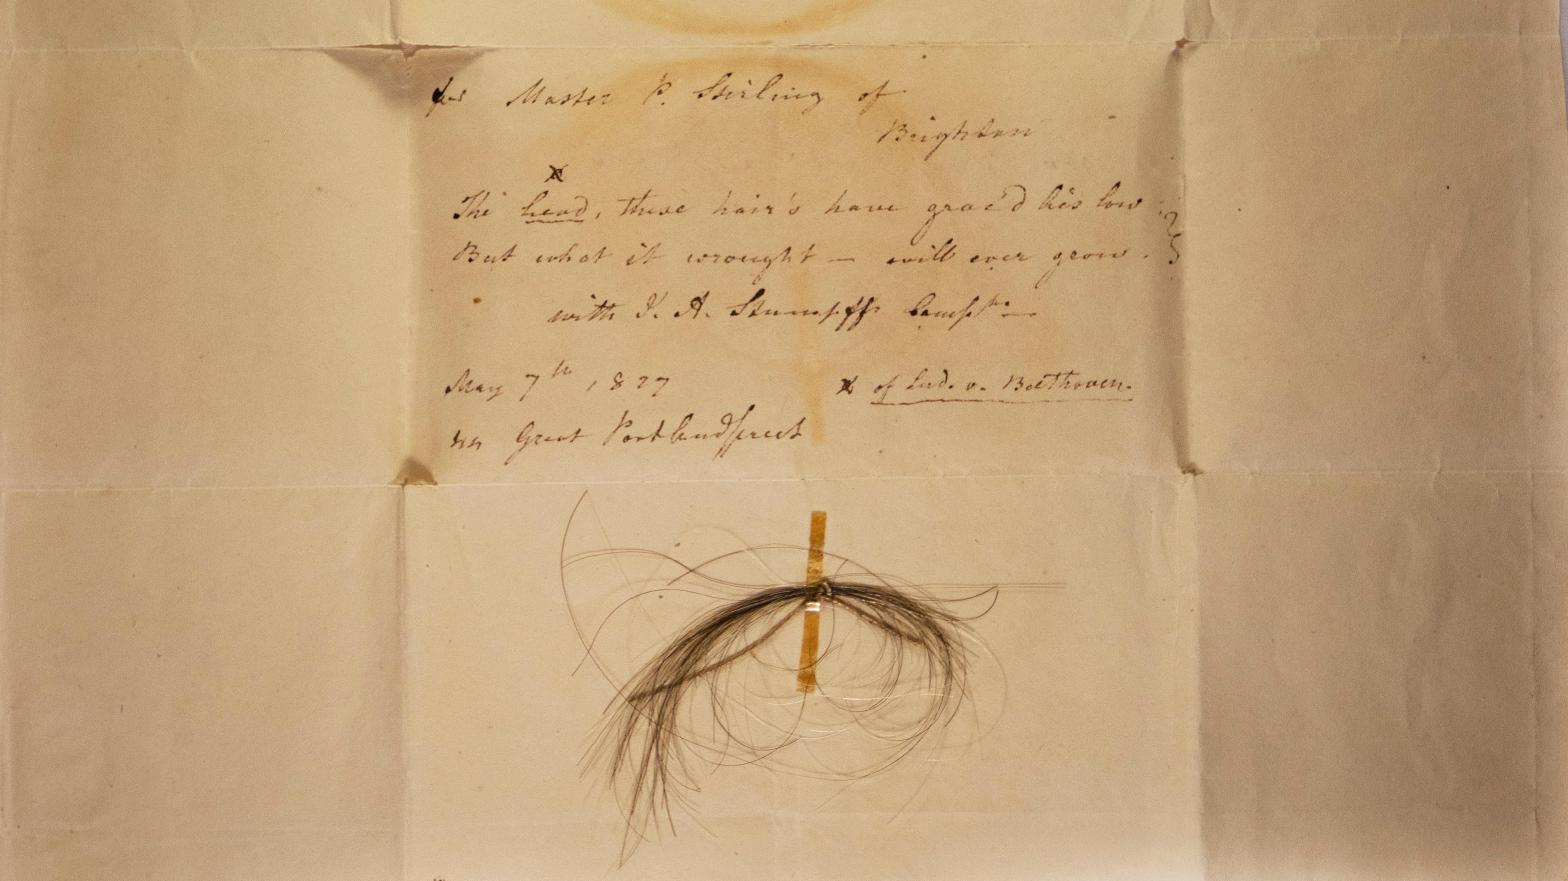 The 'Stumpff lock,' one of five locks of hair attributed to Ludwig van Beethoven. (Photo: Kevin Brown)